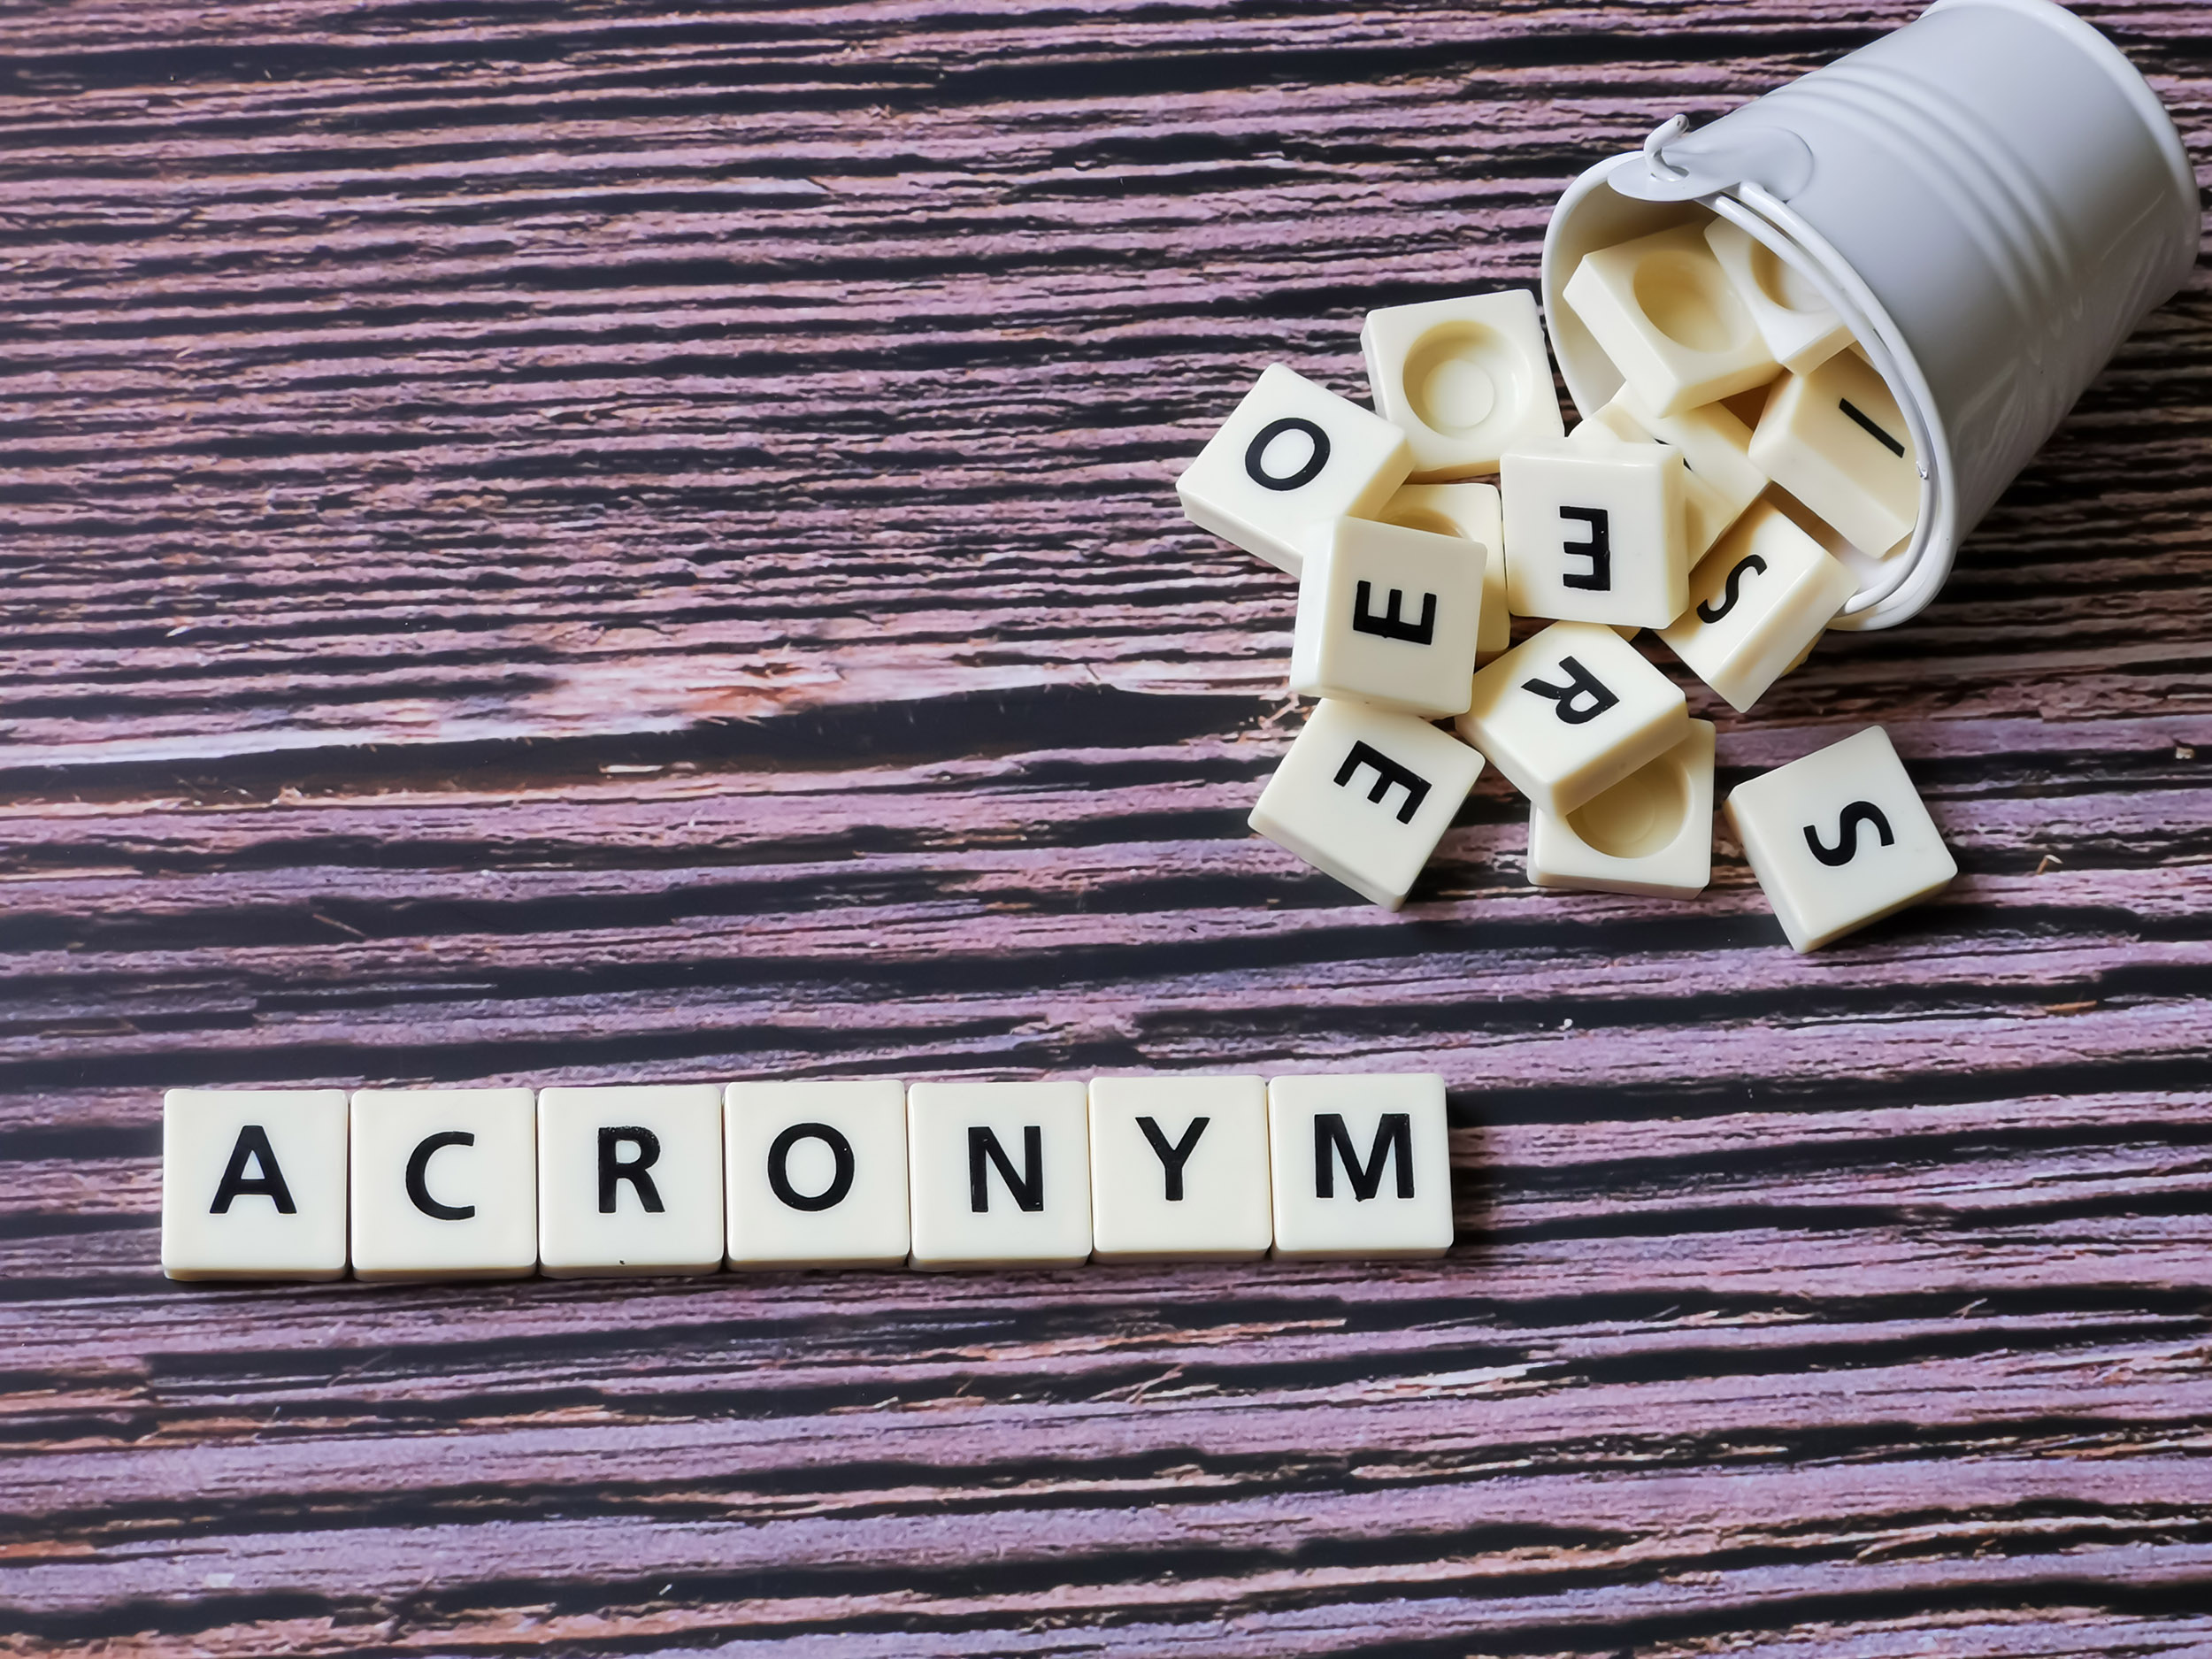 CRONYM word made from square letter tiles on wooden background.